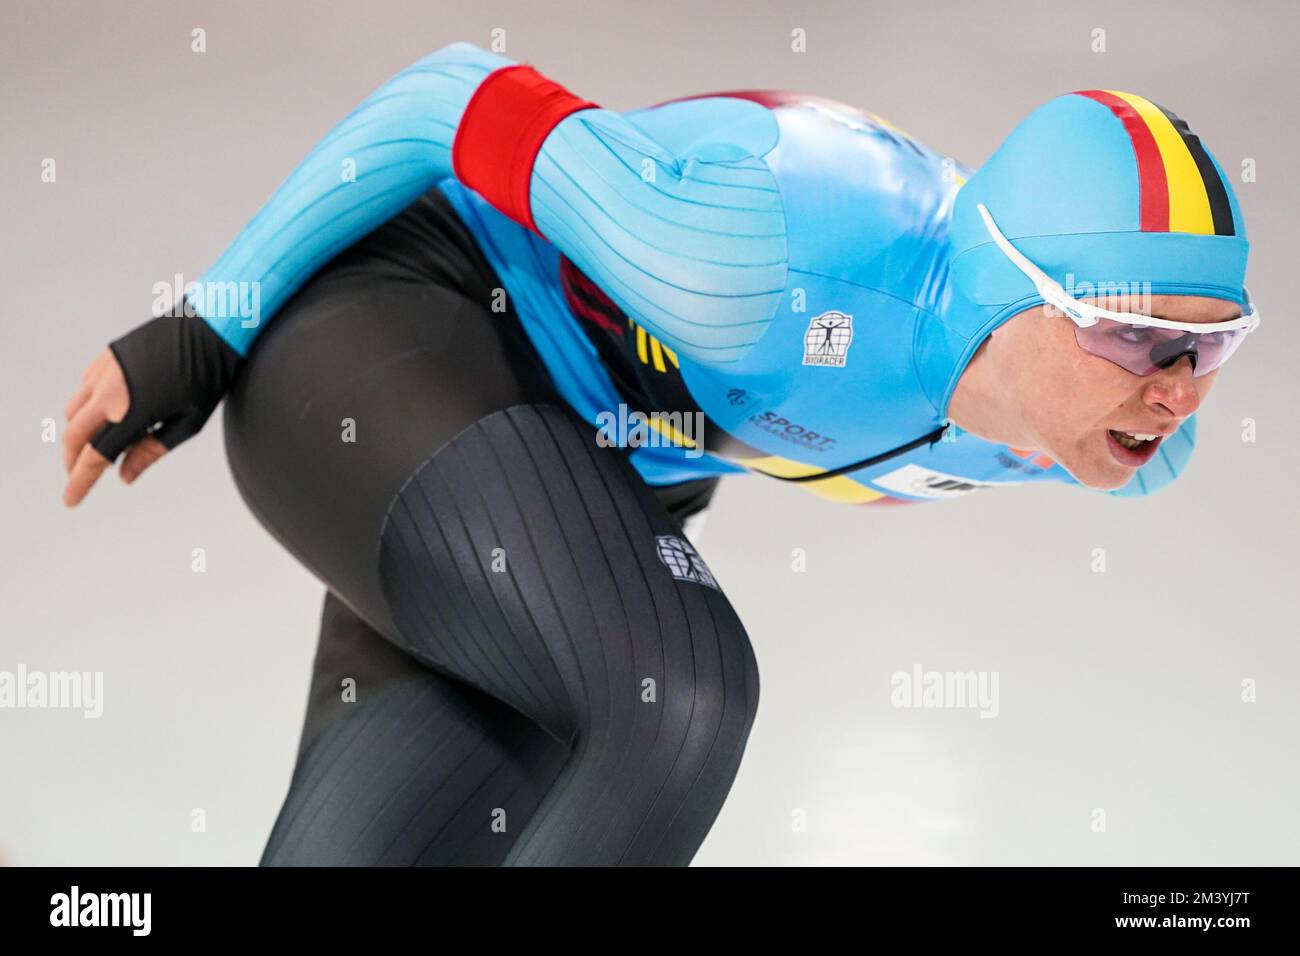 CALGARY, CANADA - DECEMBER 17: Sandrine Tas of Belgium competing on the  Women's A Group 1500m during the ISU Speed Skating World Cup 4 on December  17, 2022 in Calgary, Canada (Photo